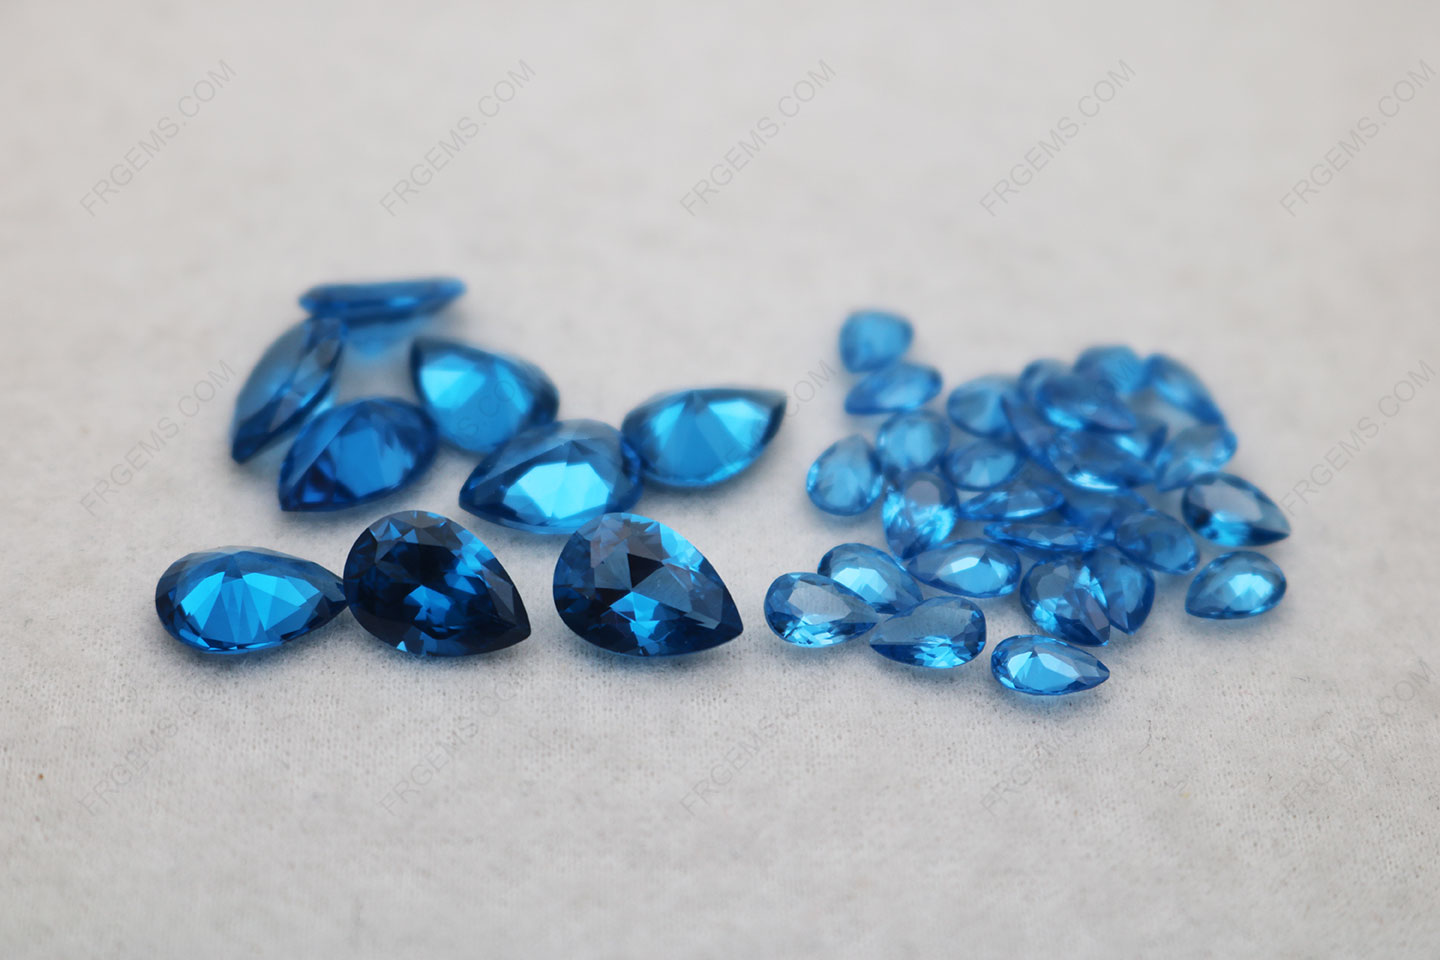 Wholesale Spinel #119 Swiss blue color Pear Shape Faceted Cut gemstones from China